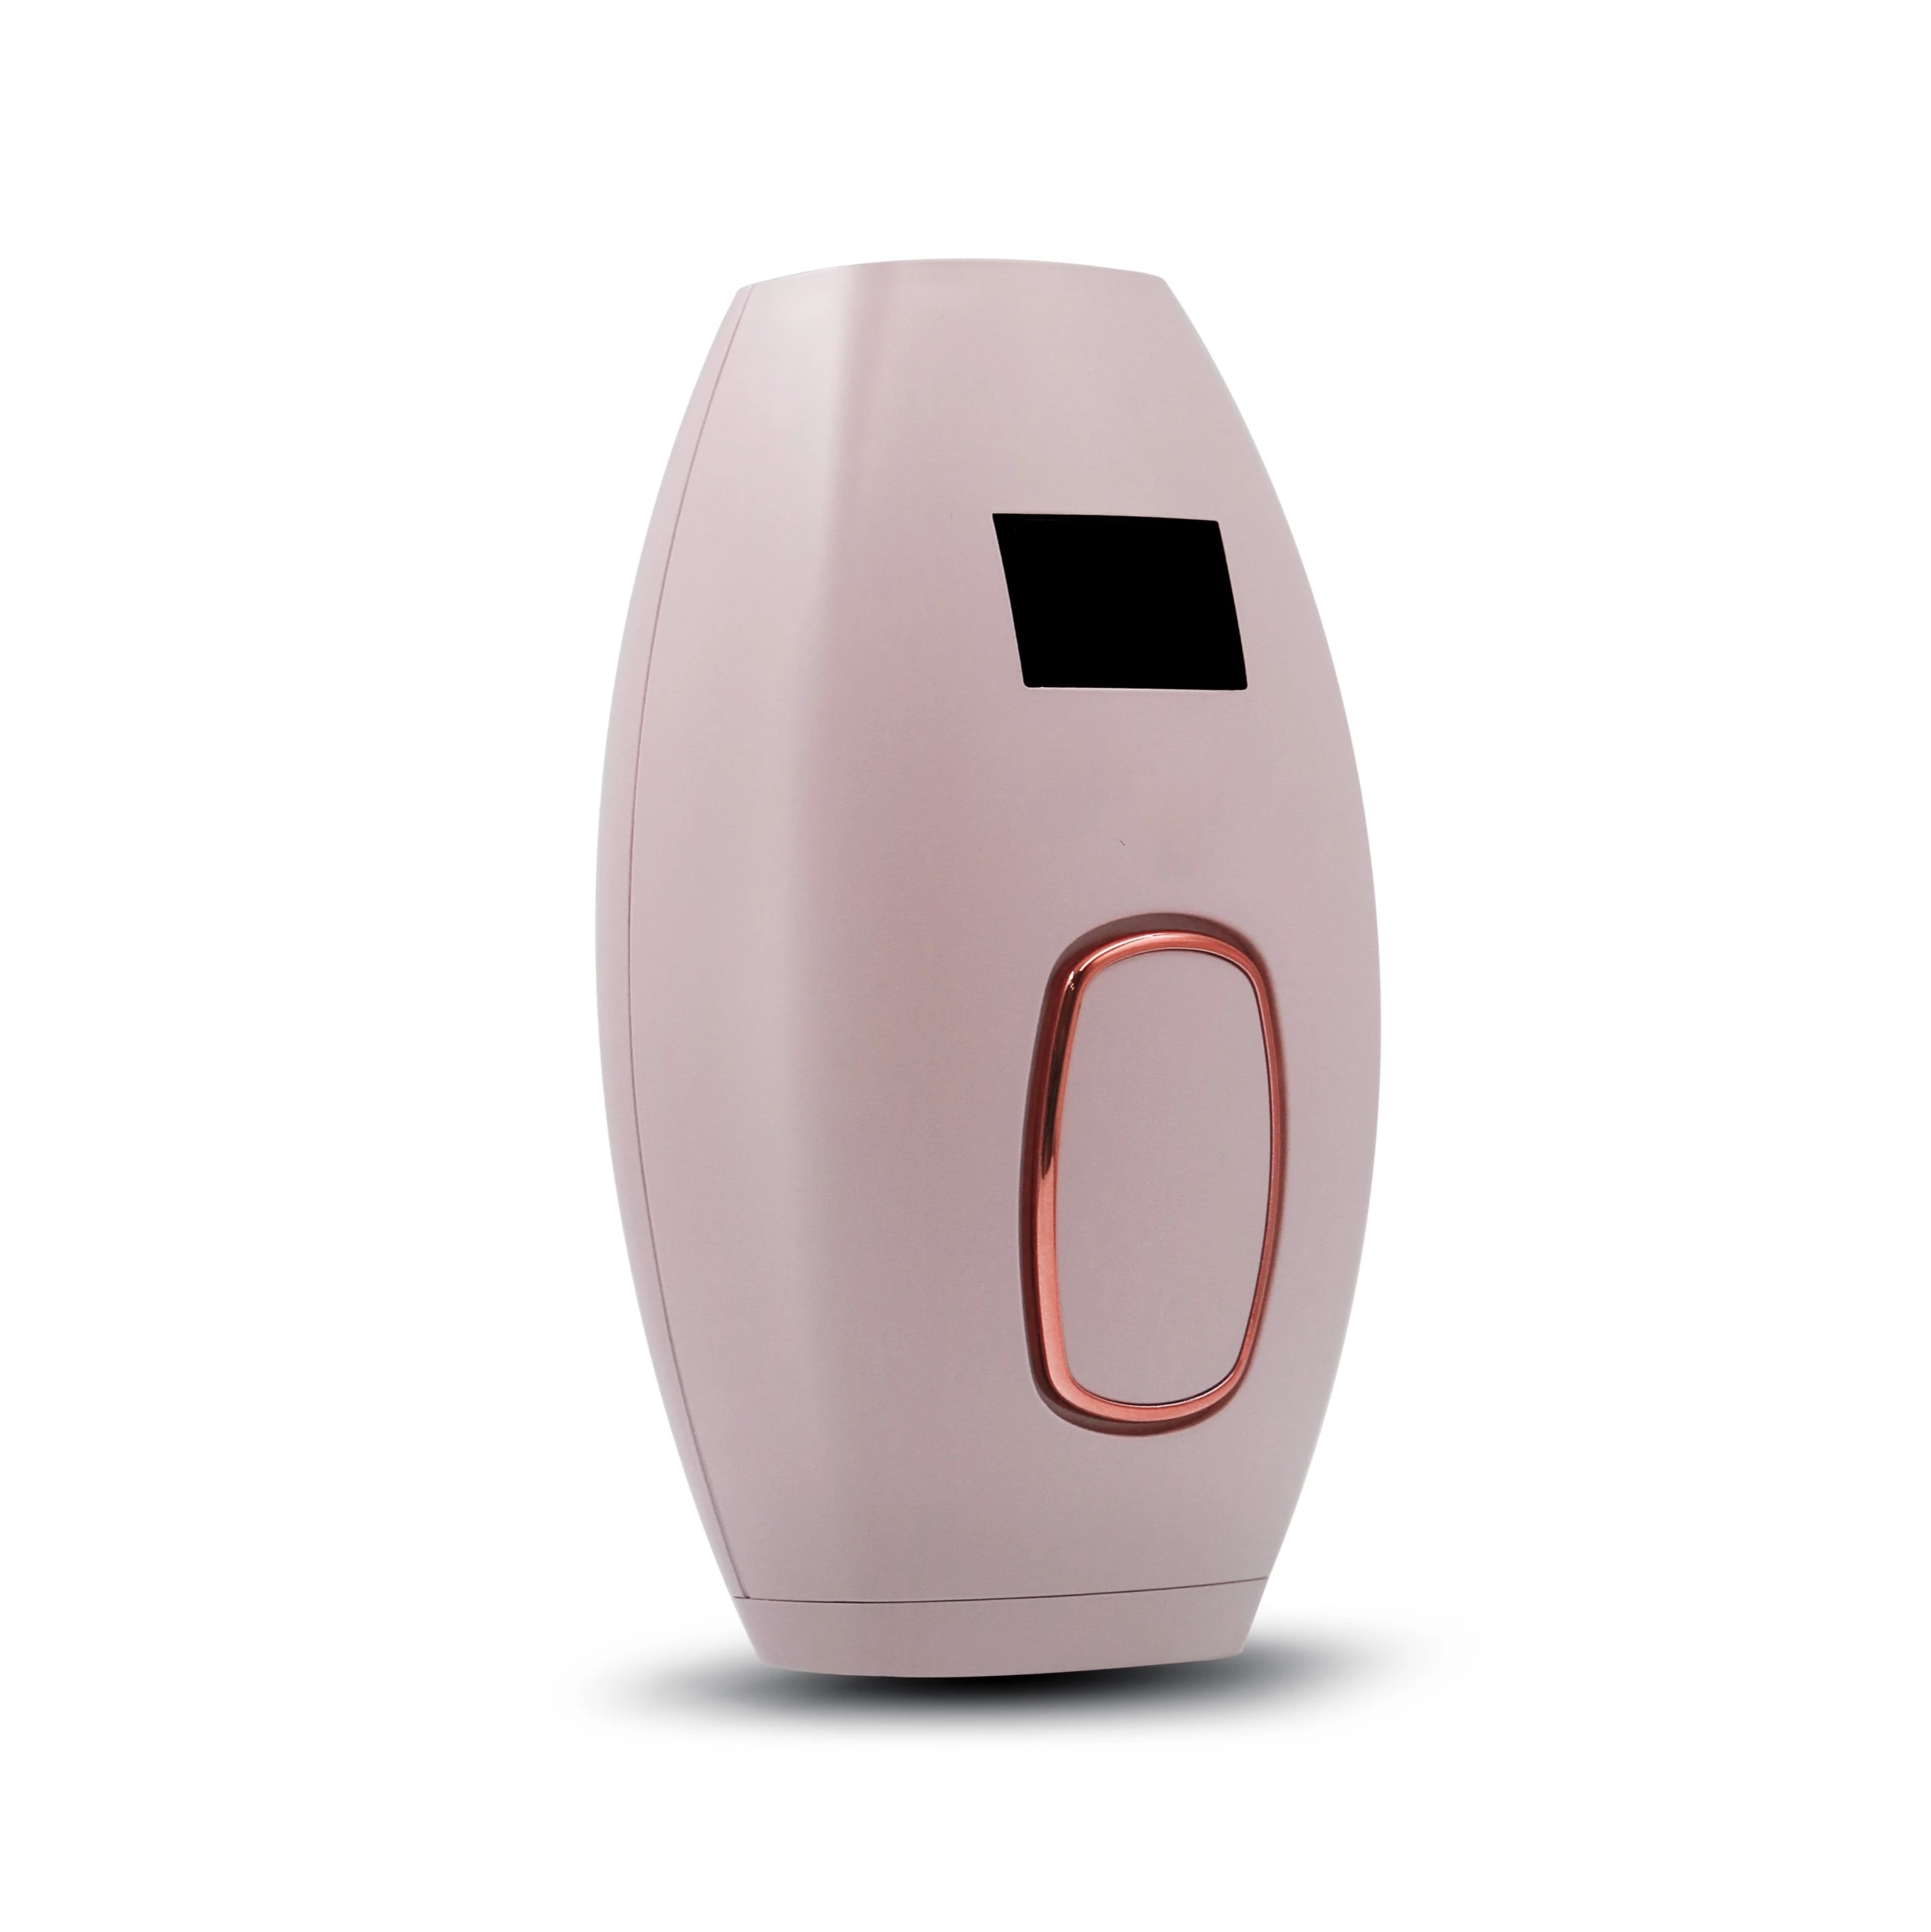 Led display ipl hair removal device 500000 flashes home use machine